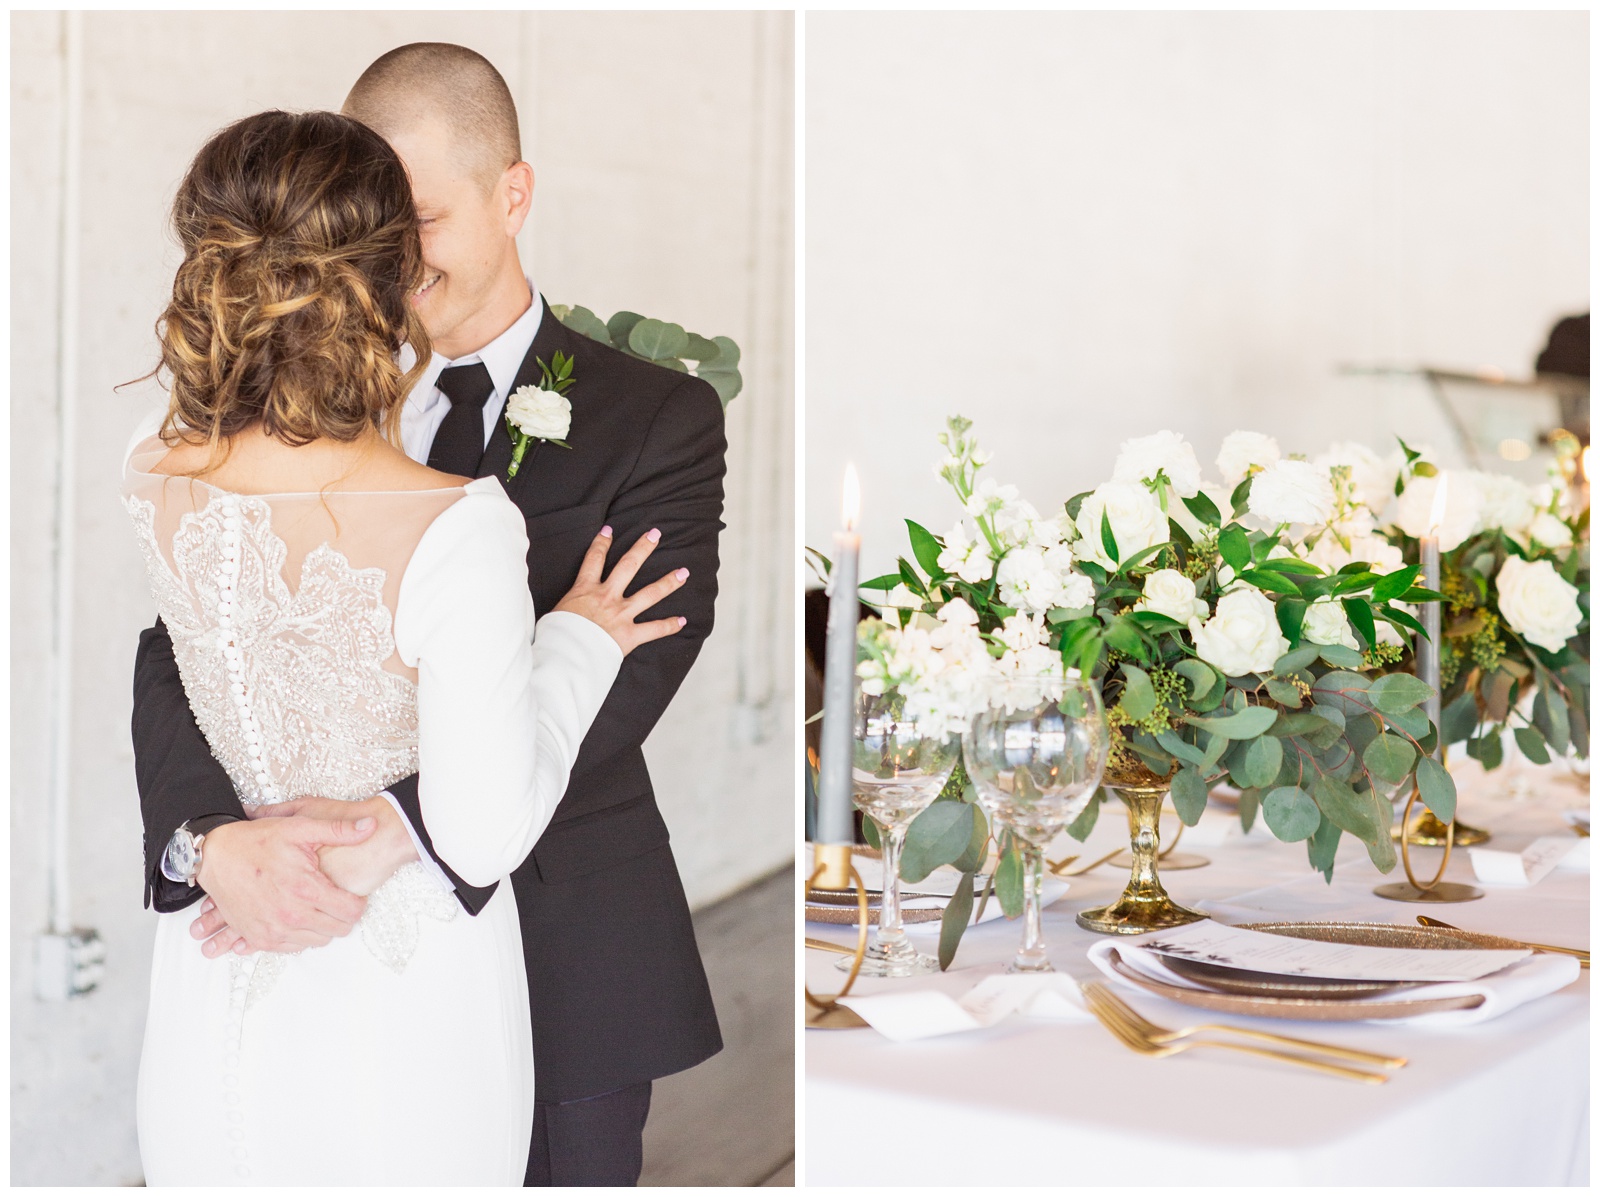 Why we edit light and airy vs dark and moody. Bride and groom with tablescape and flowers